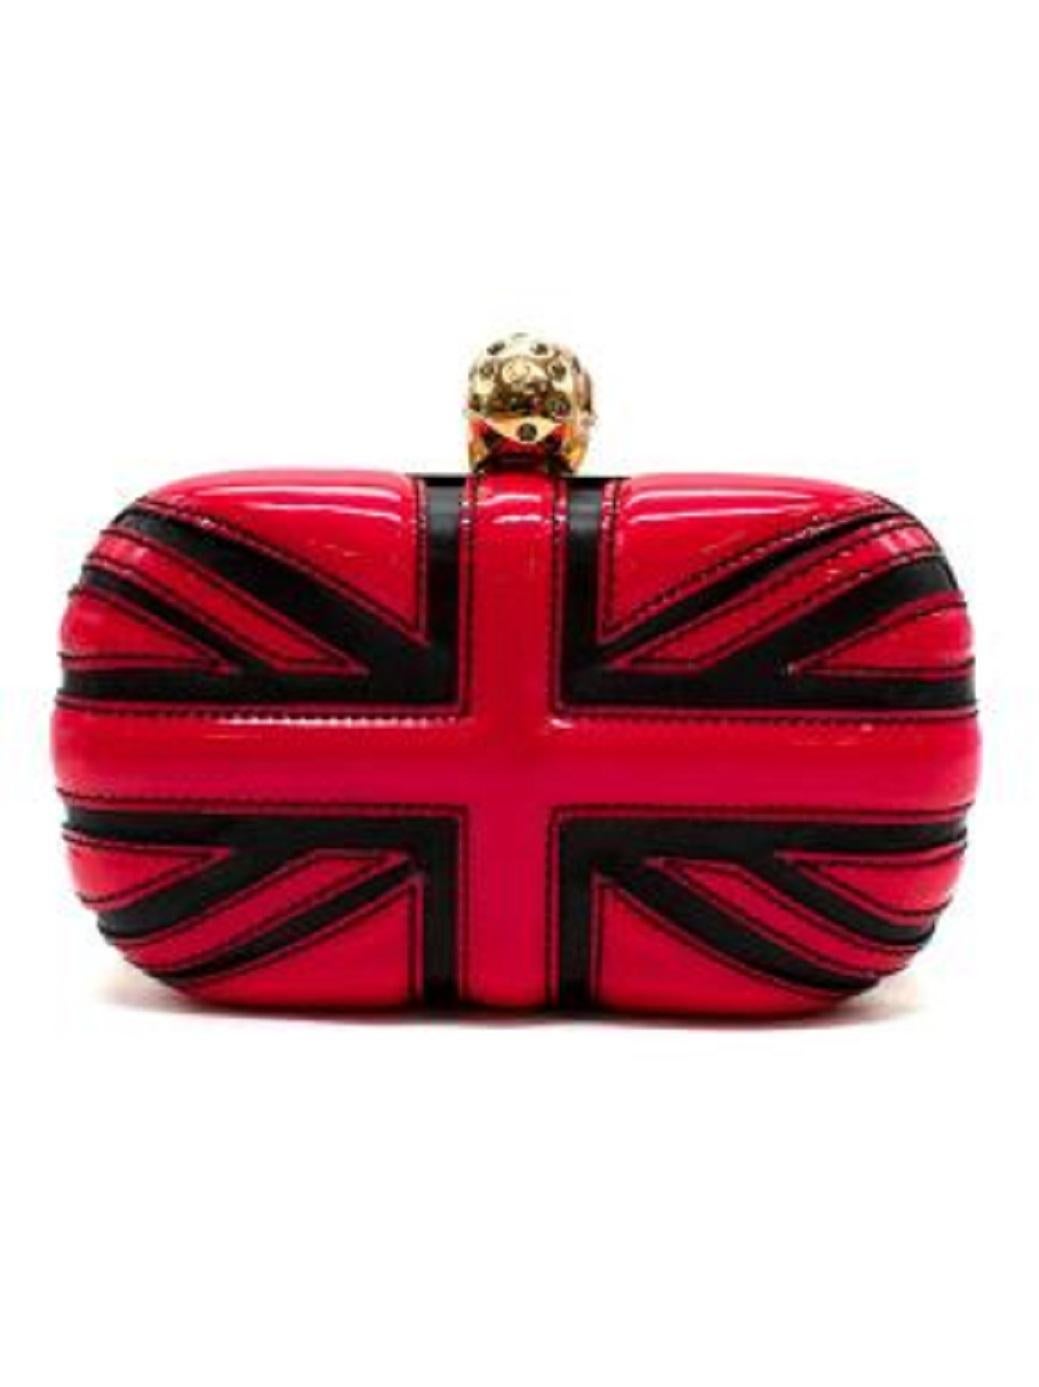 Alexander McQueen Red Patent-leather Union Jack Clutch In Excellent Condition For Sale In London, GB